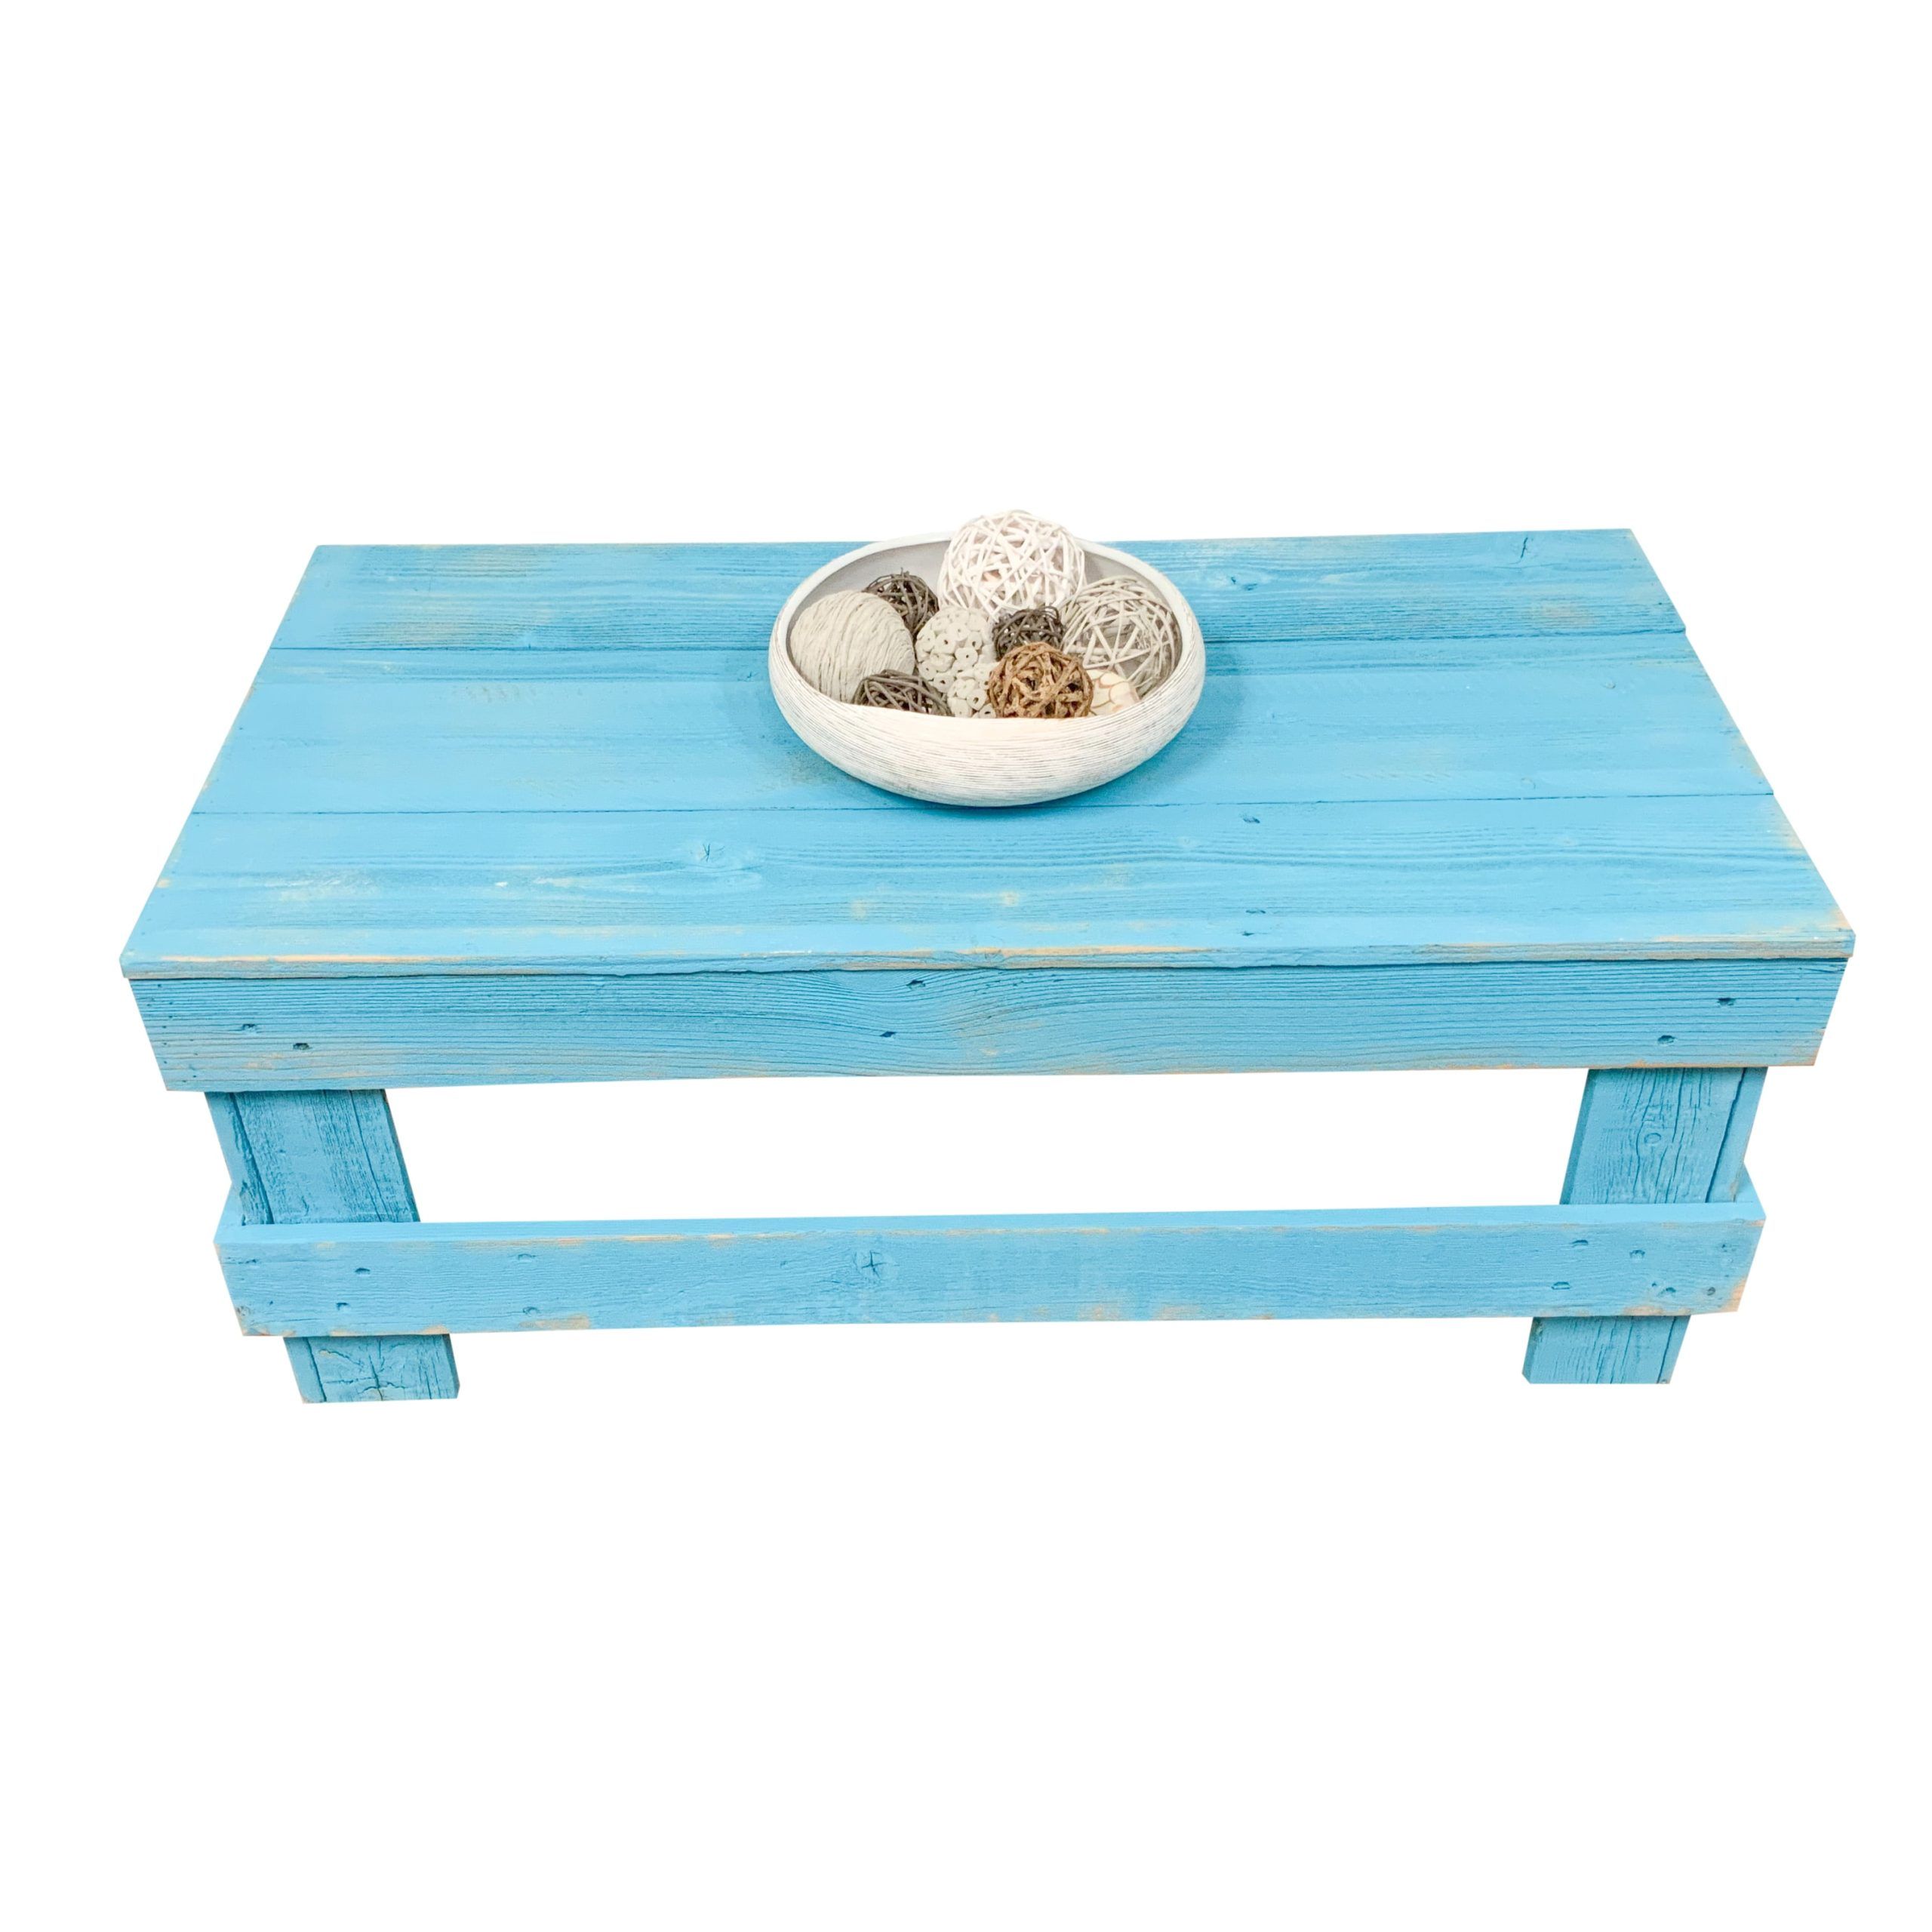 Woven Paths Reclaimed Wood Coffee Table, Turquoise – Walmart For Woven Paths Coffee Tables (Gallery 10 of 20)